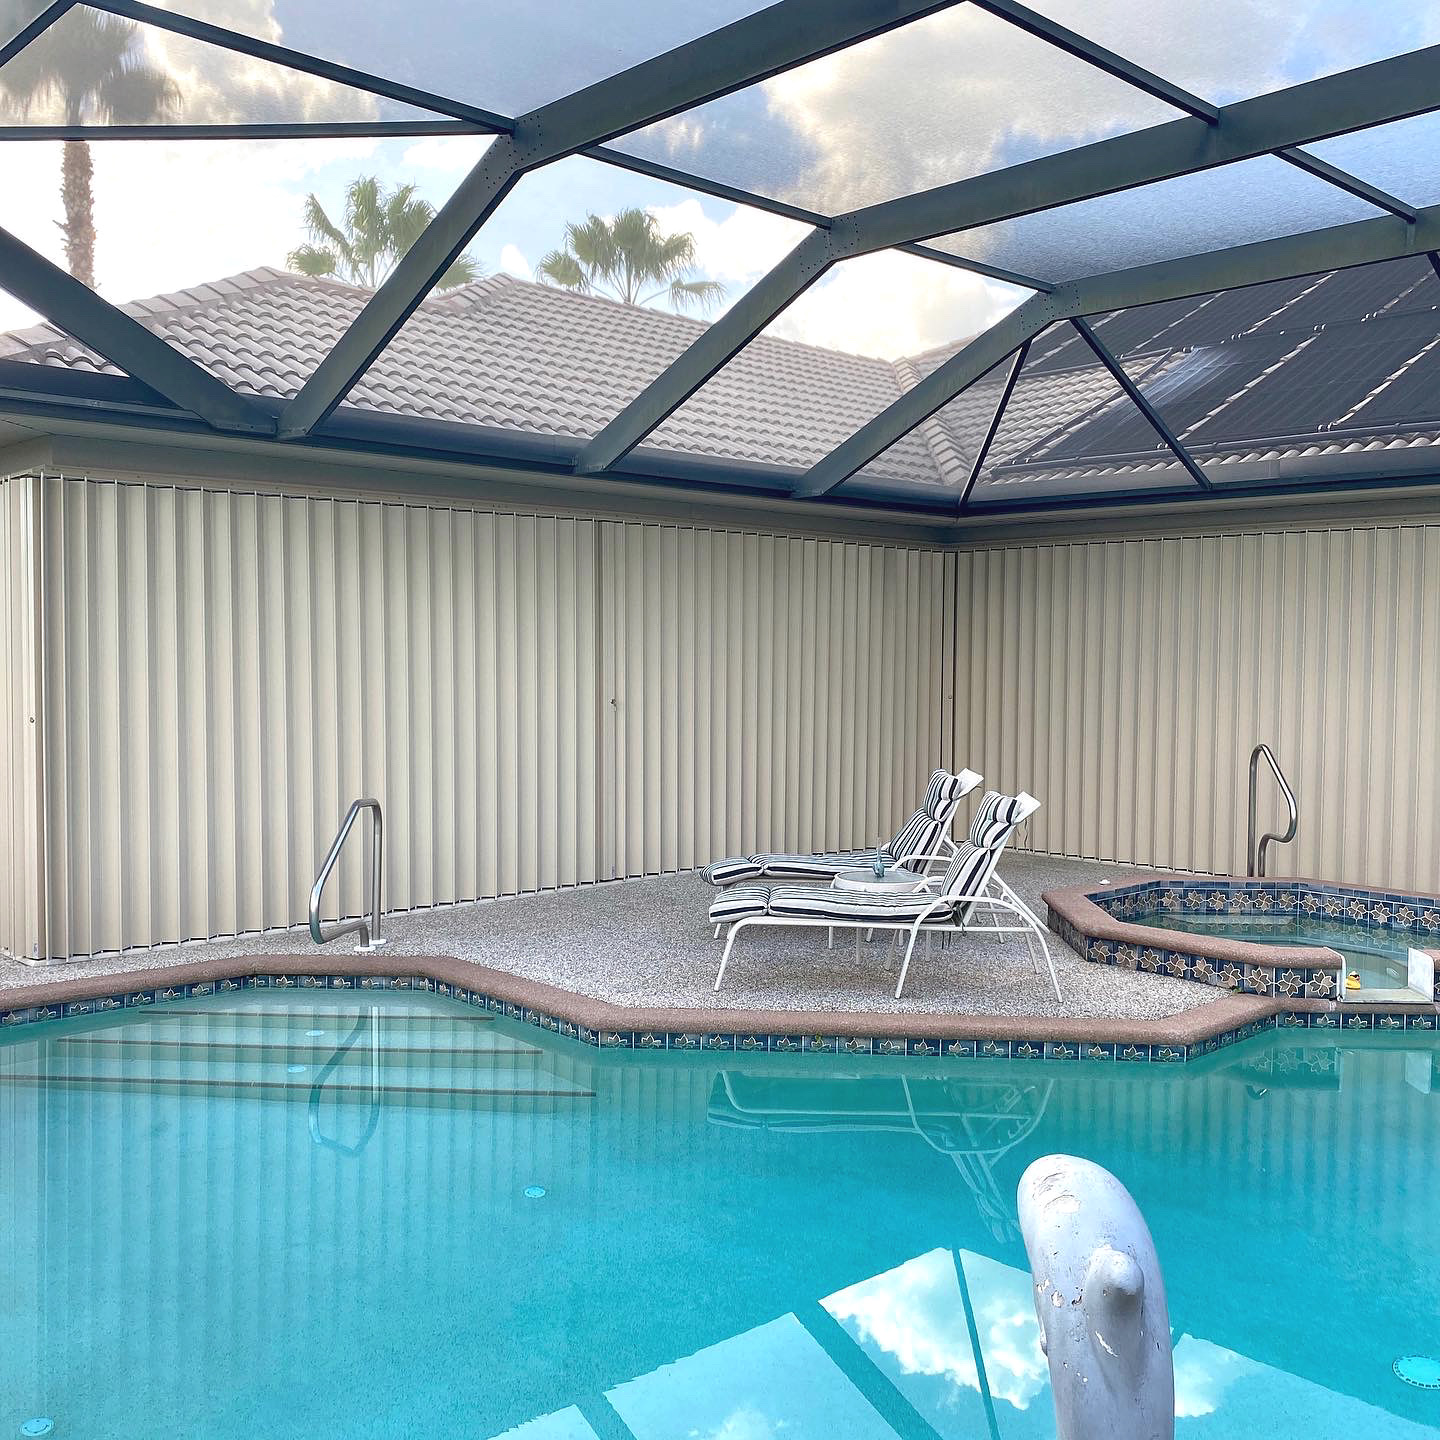 Installed Accordion Shutters Pool - Shutters239